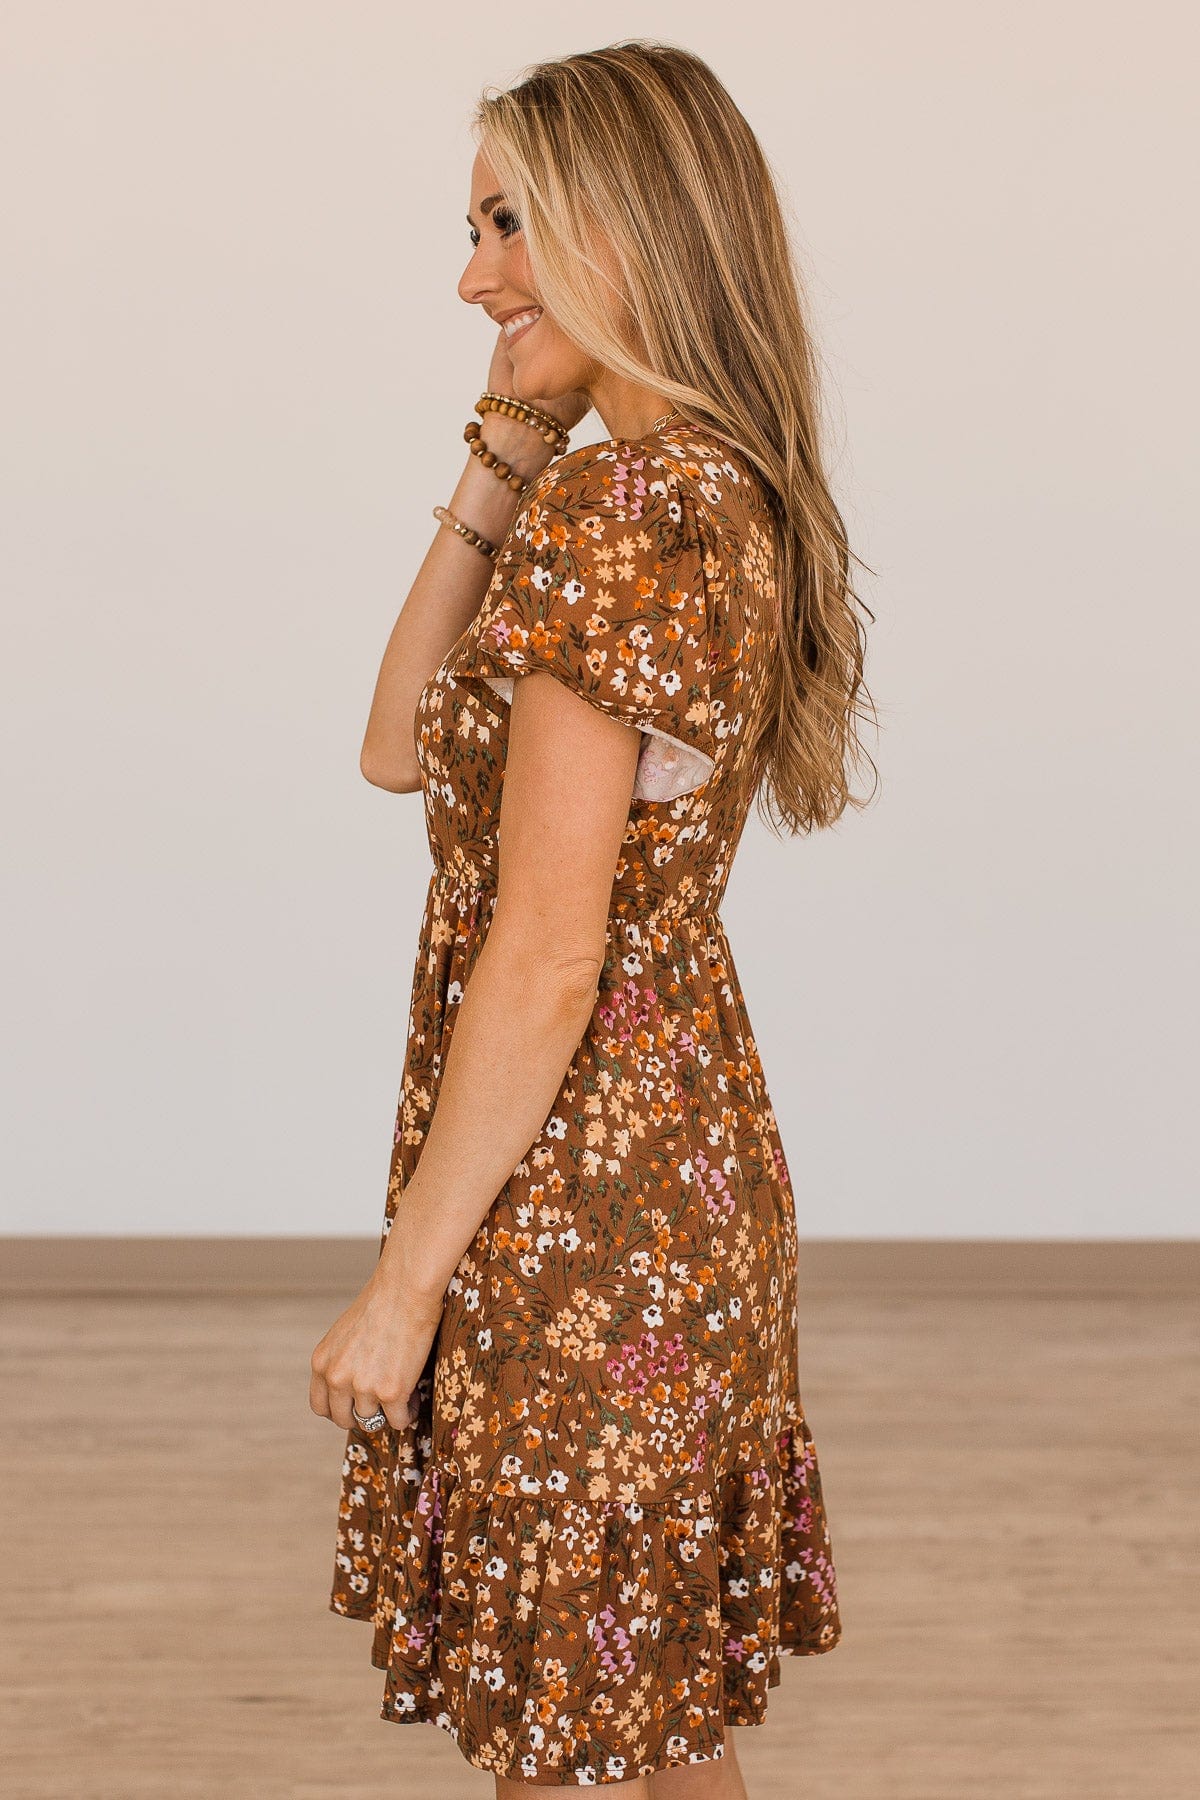 That Forever Feeling Floral Dress- Brown